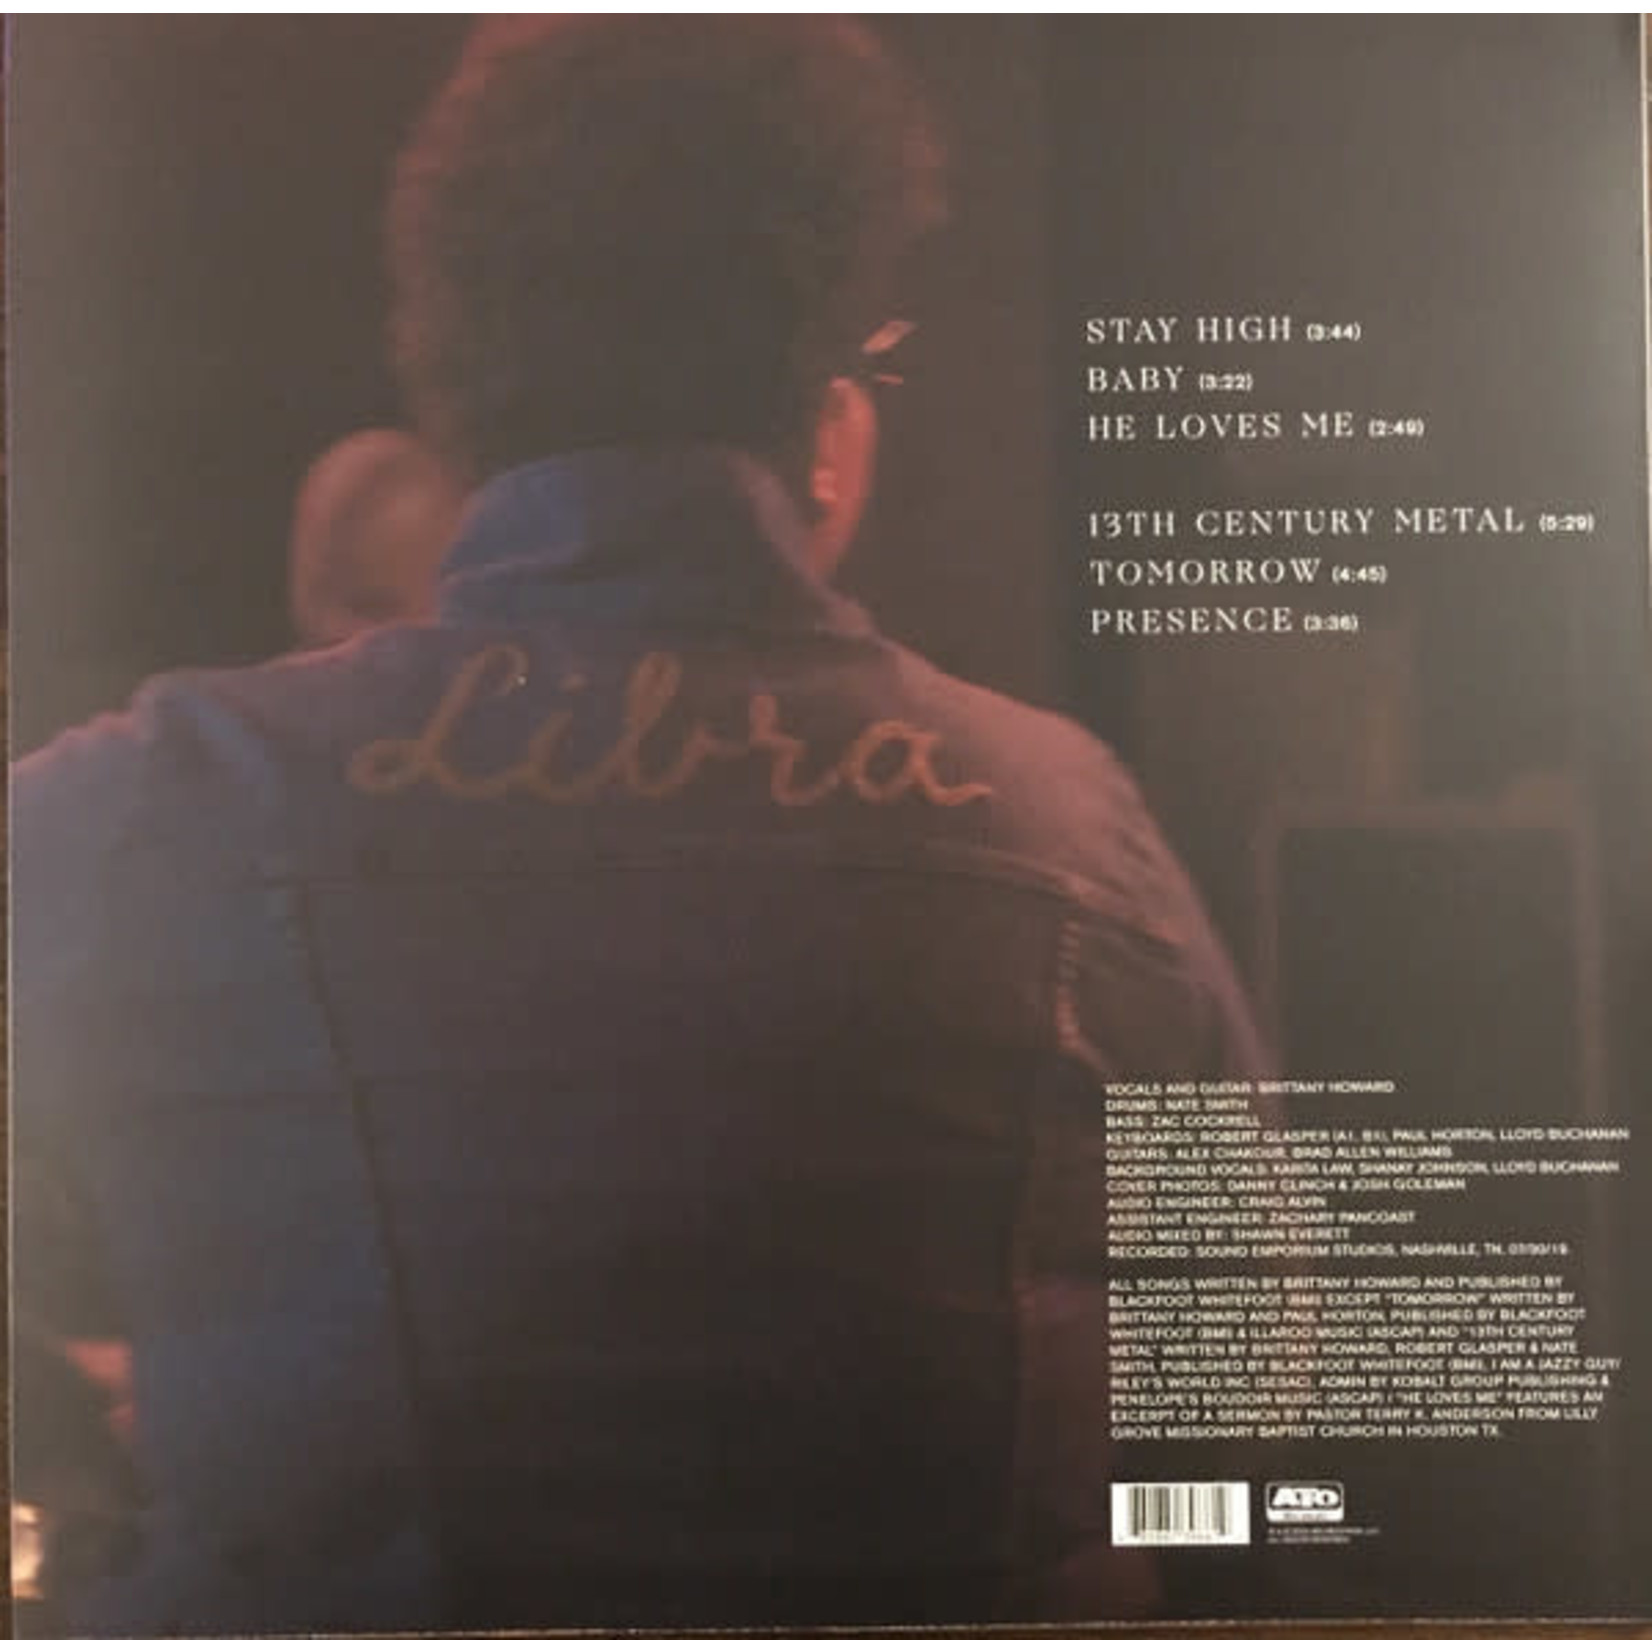 RSD Drops Brittany Howard - Live at Sound Emporium (12") [Maroon]